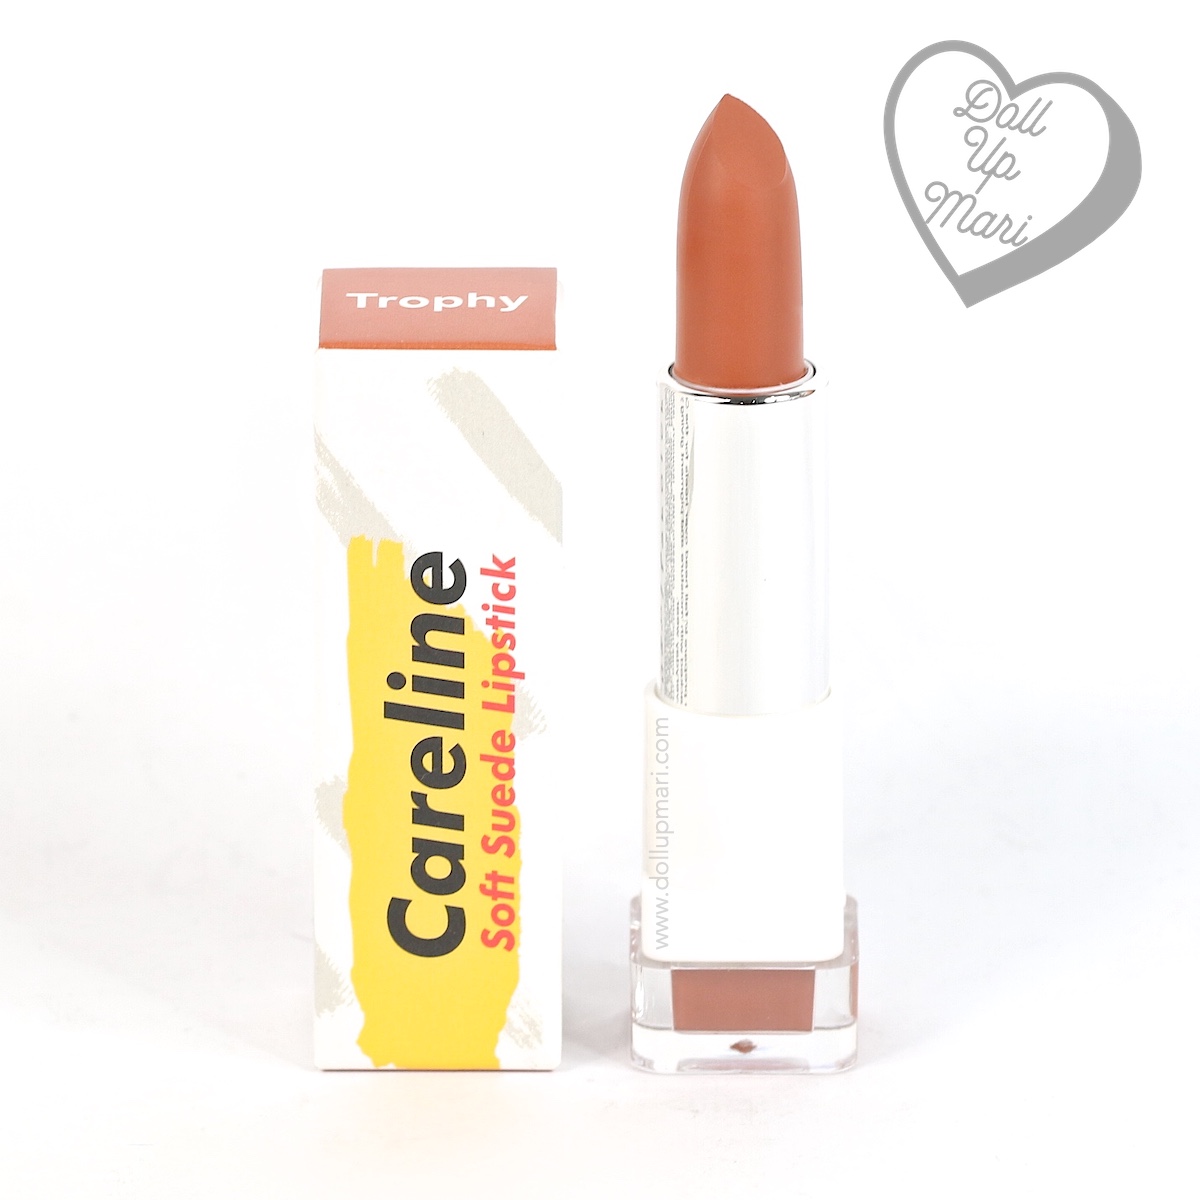 Careline Soft Suede Lipstick (Icon) Review, Swatch, Price 